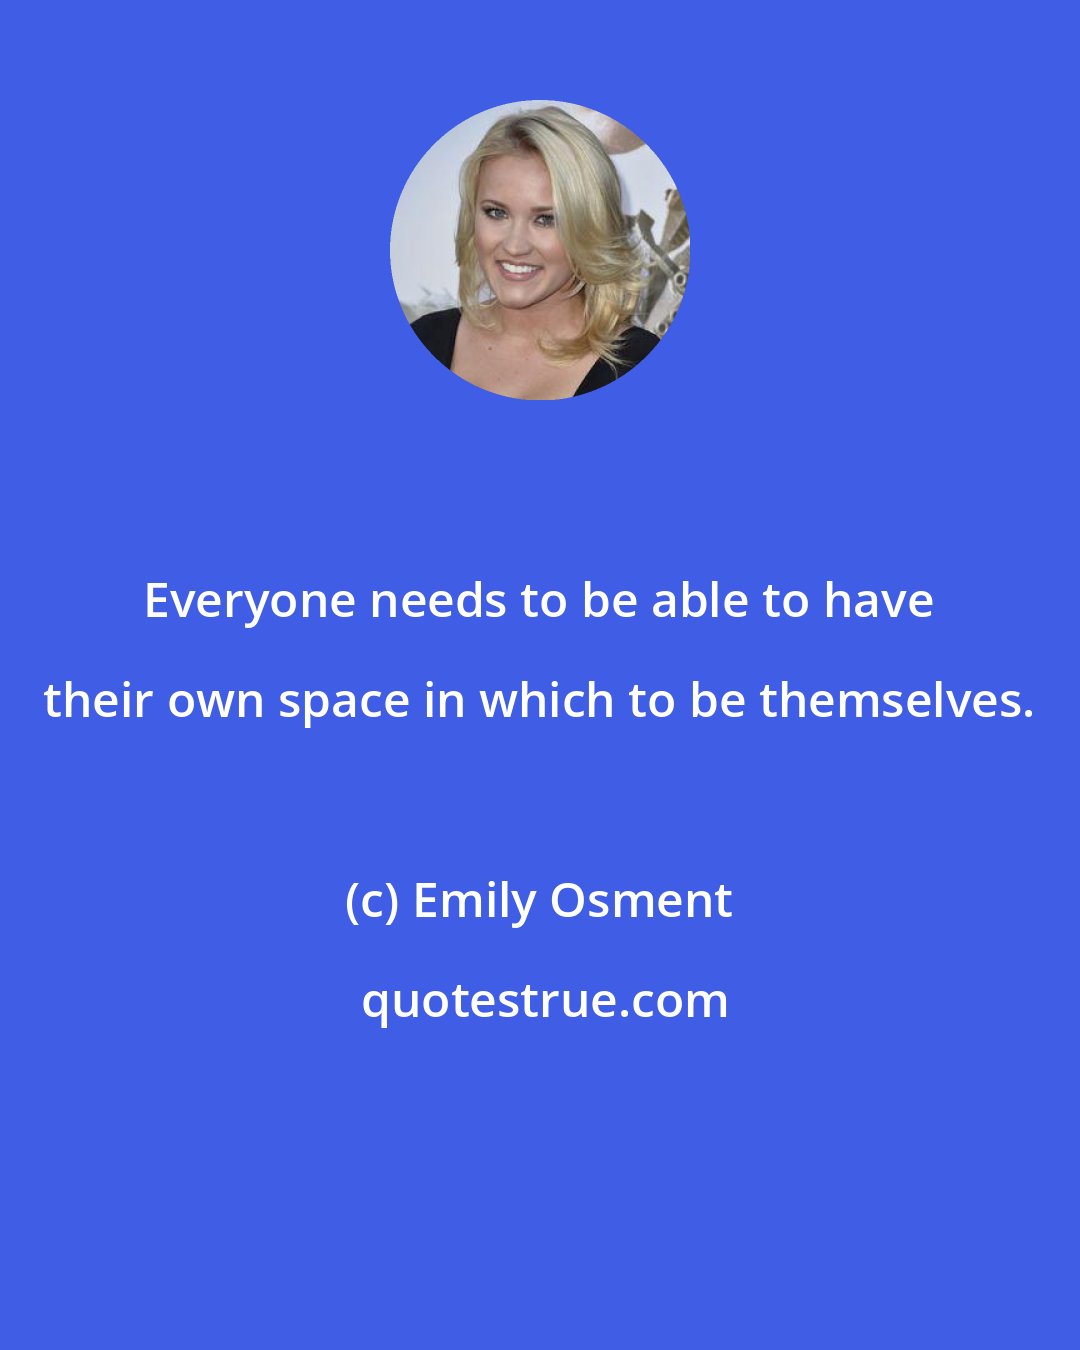 Emily Osment: Everyone needs to be able to have their own space in which to be themselves.